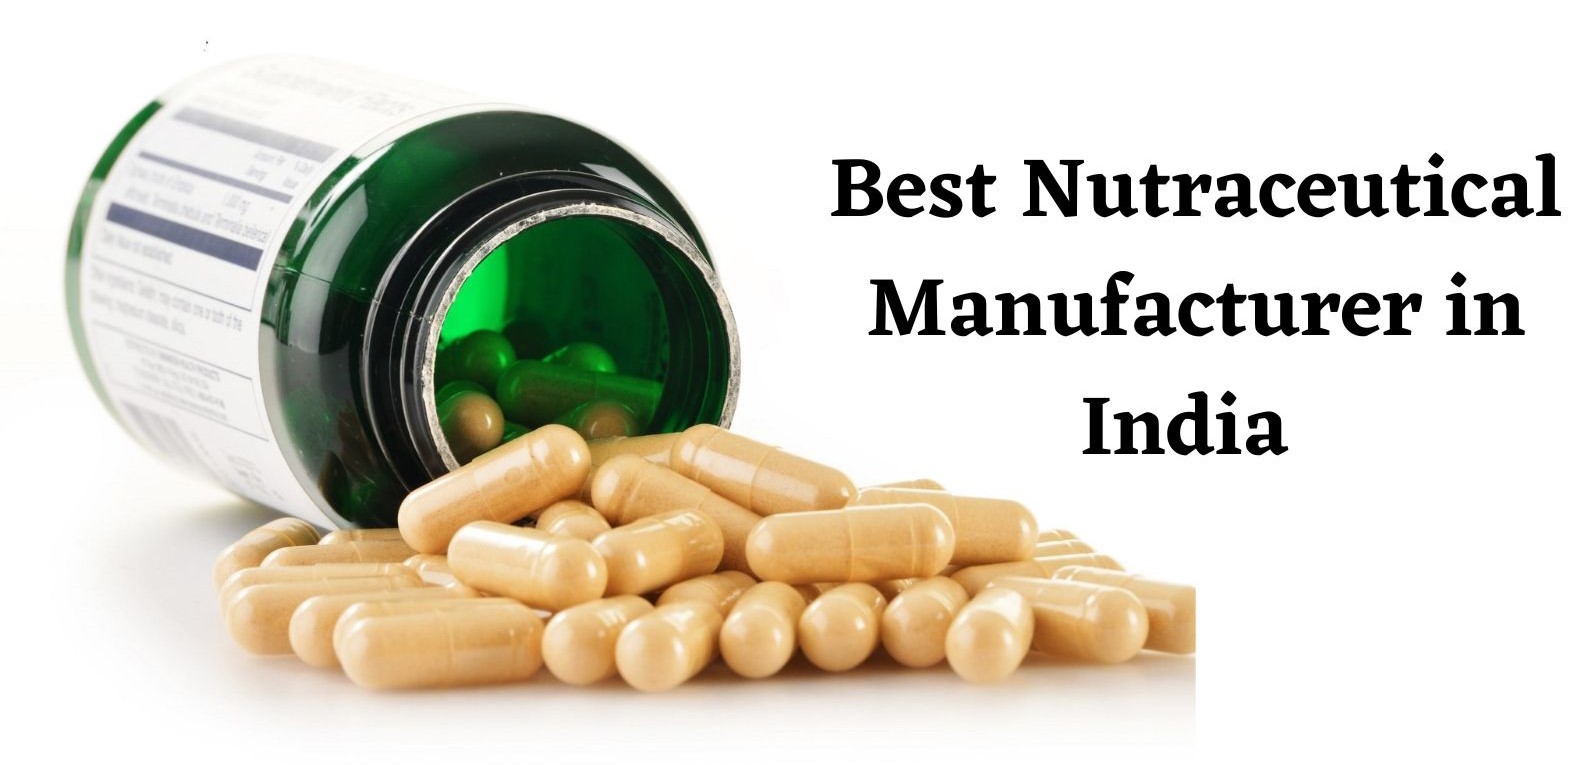 Nutraceutical Manufacturer in India